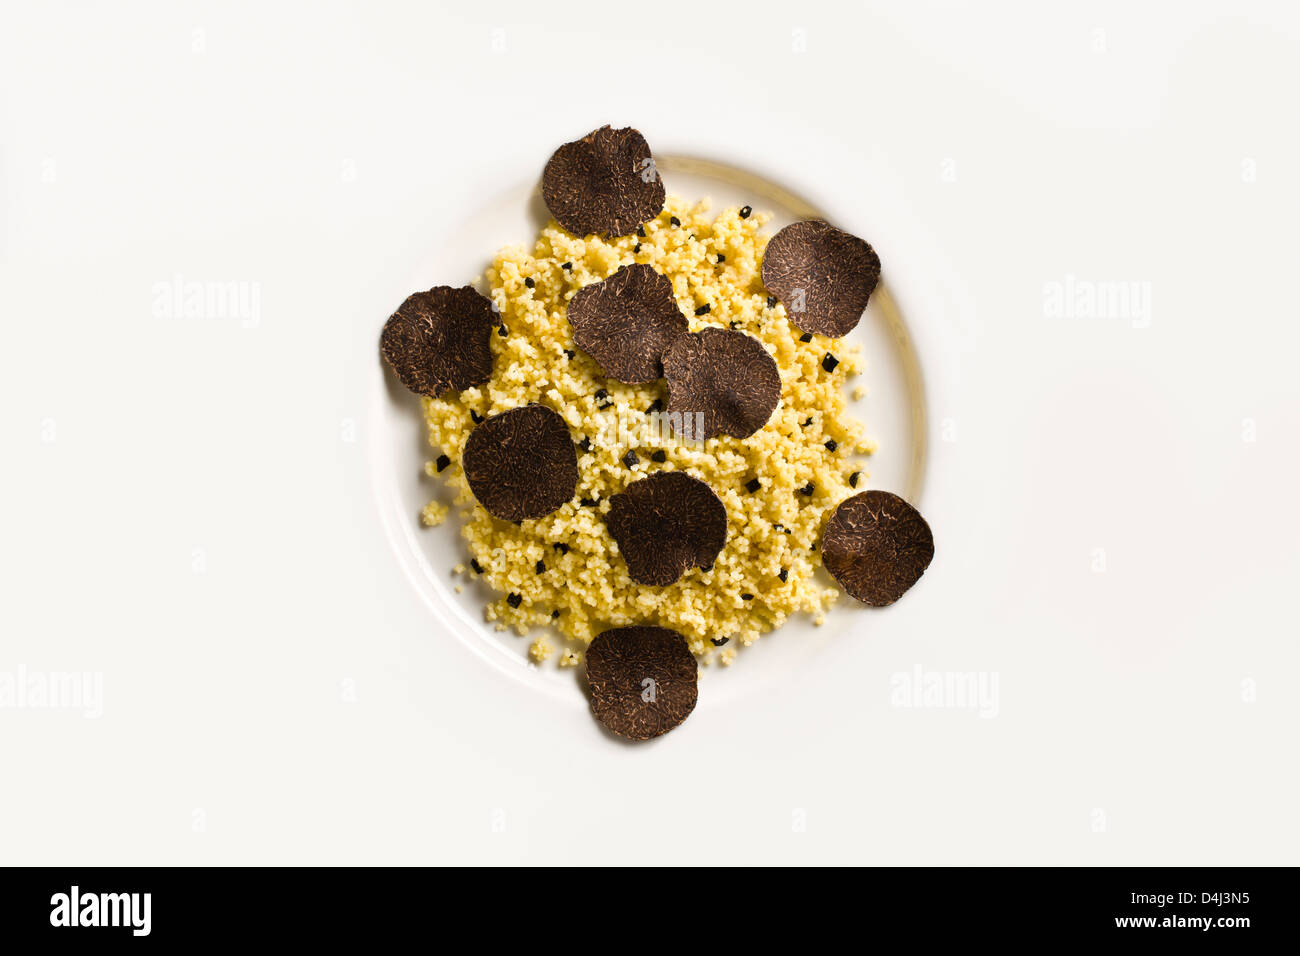 Cous Cous with Black Truffle on a white plate. Stock Photo